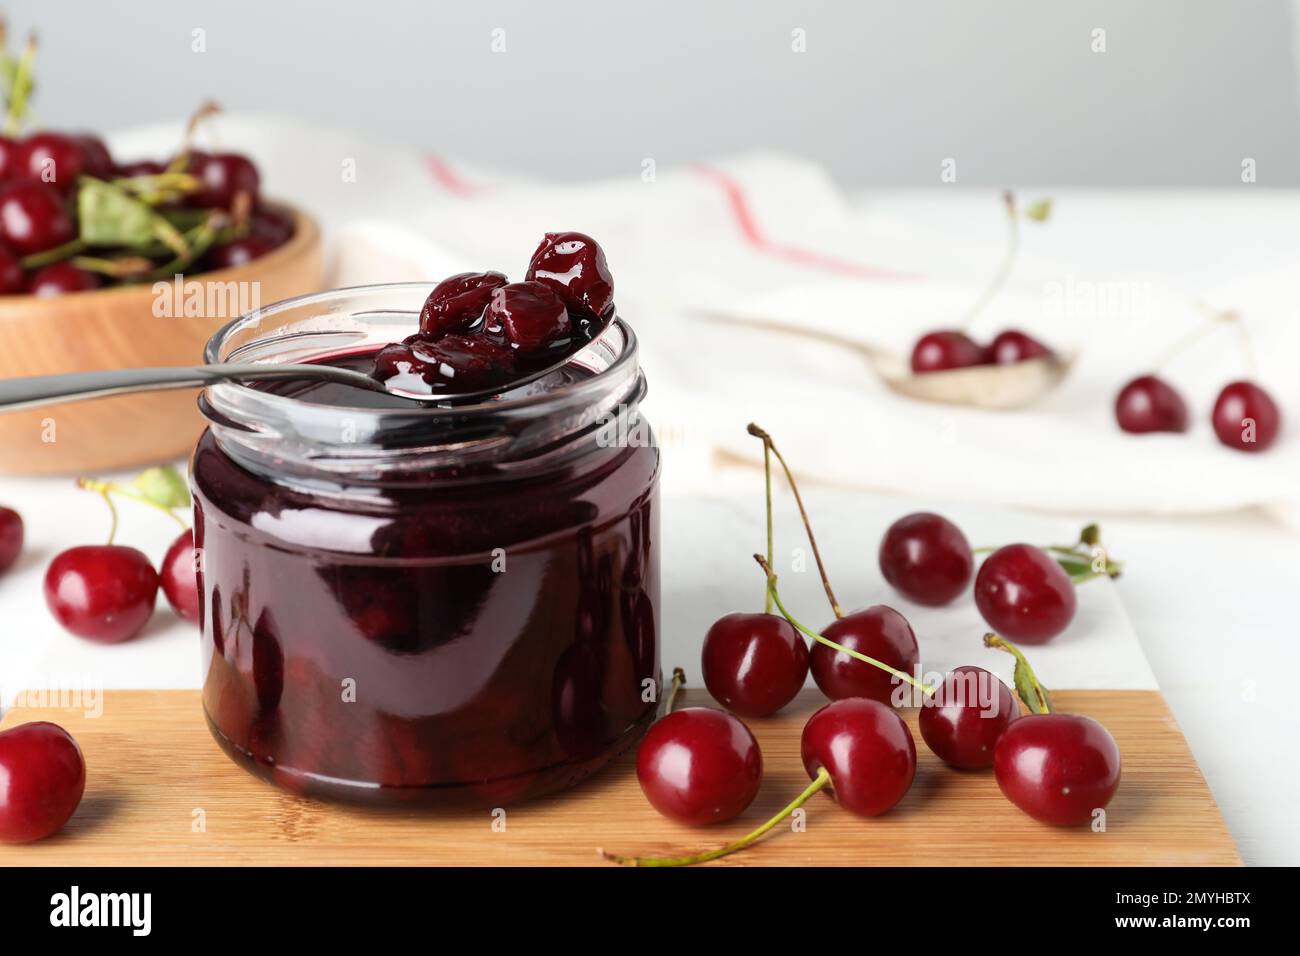 Jar of pickled cherries and fresh fruits on table, closeup Stock Photo